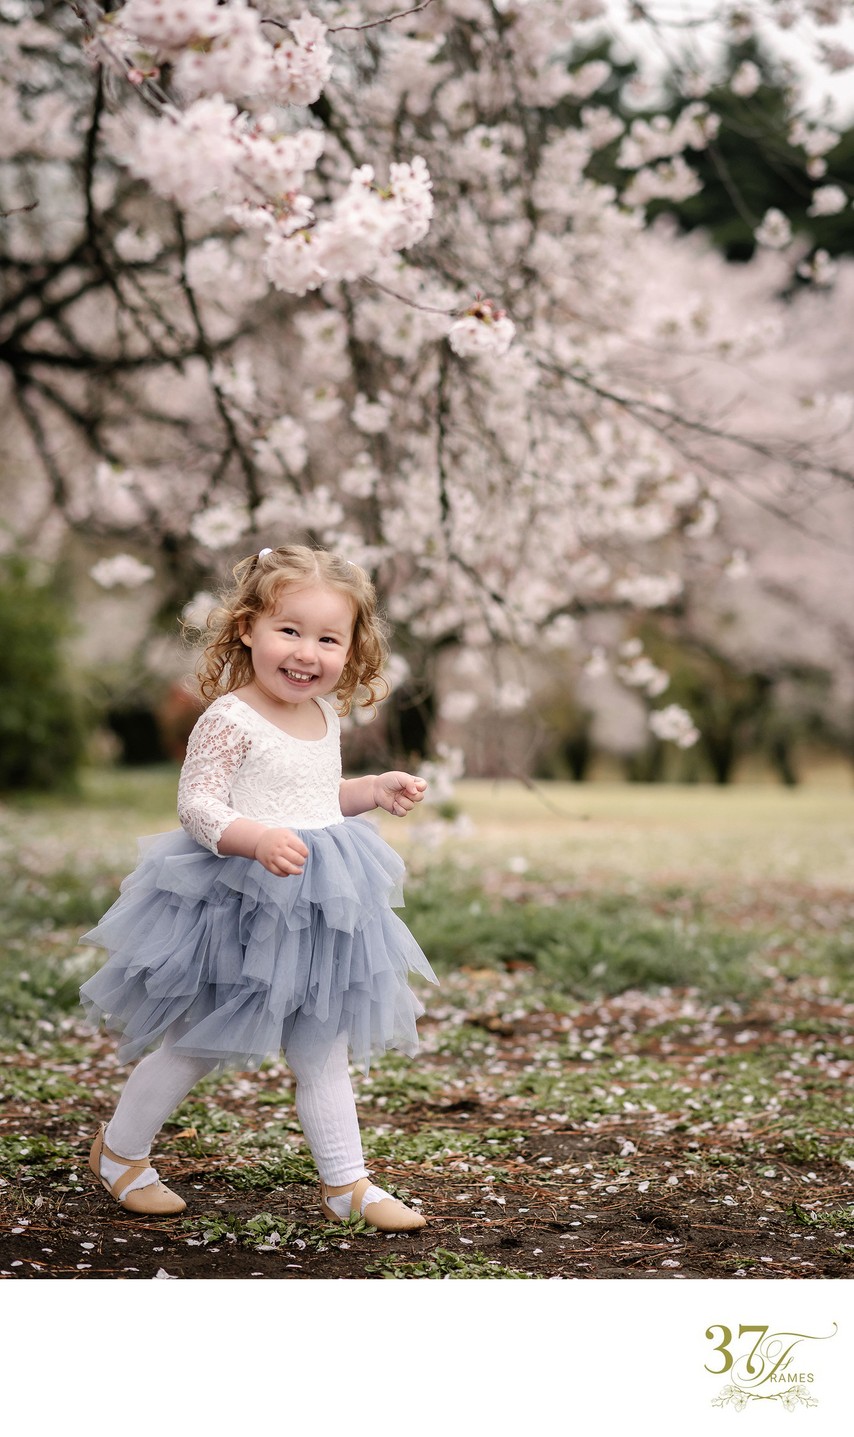 Captivating Connections: Portraits in Cherry Blossoms